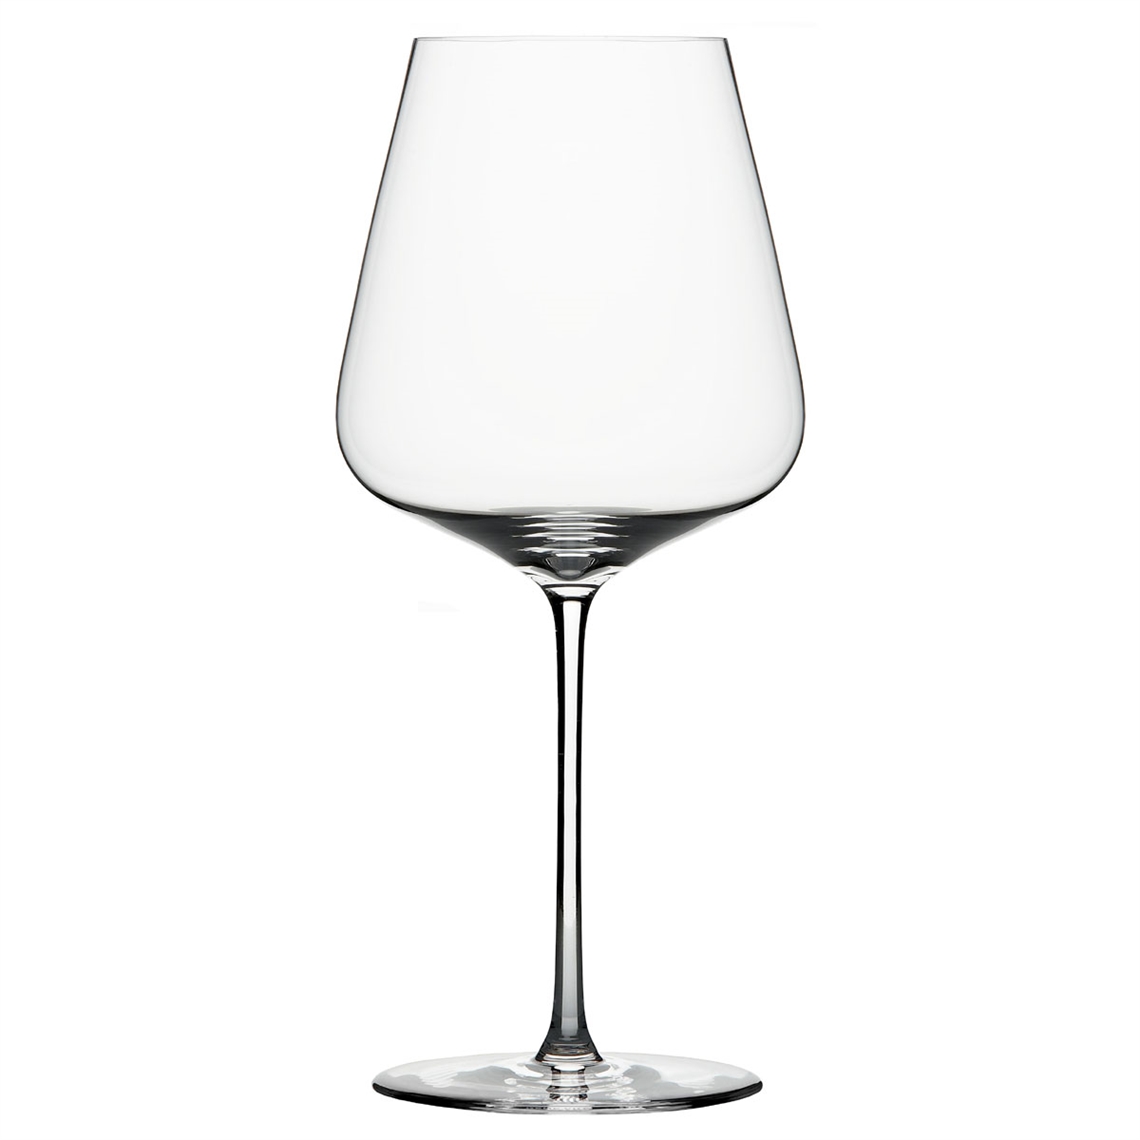 View more exquisit from our Premium Mouth Blown Glassware range